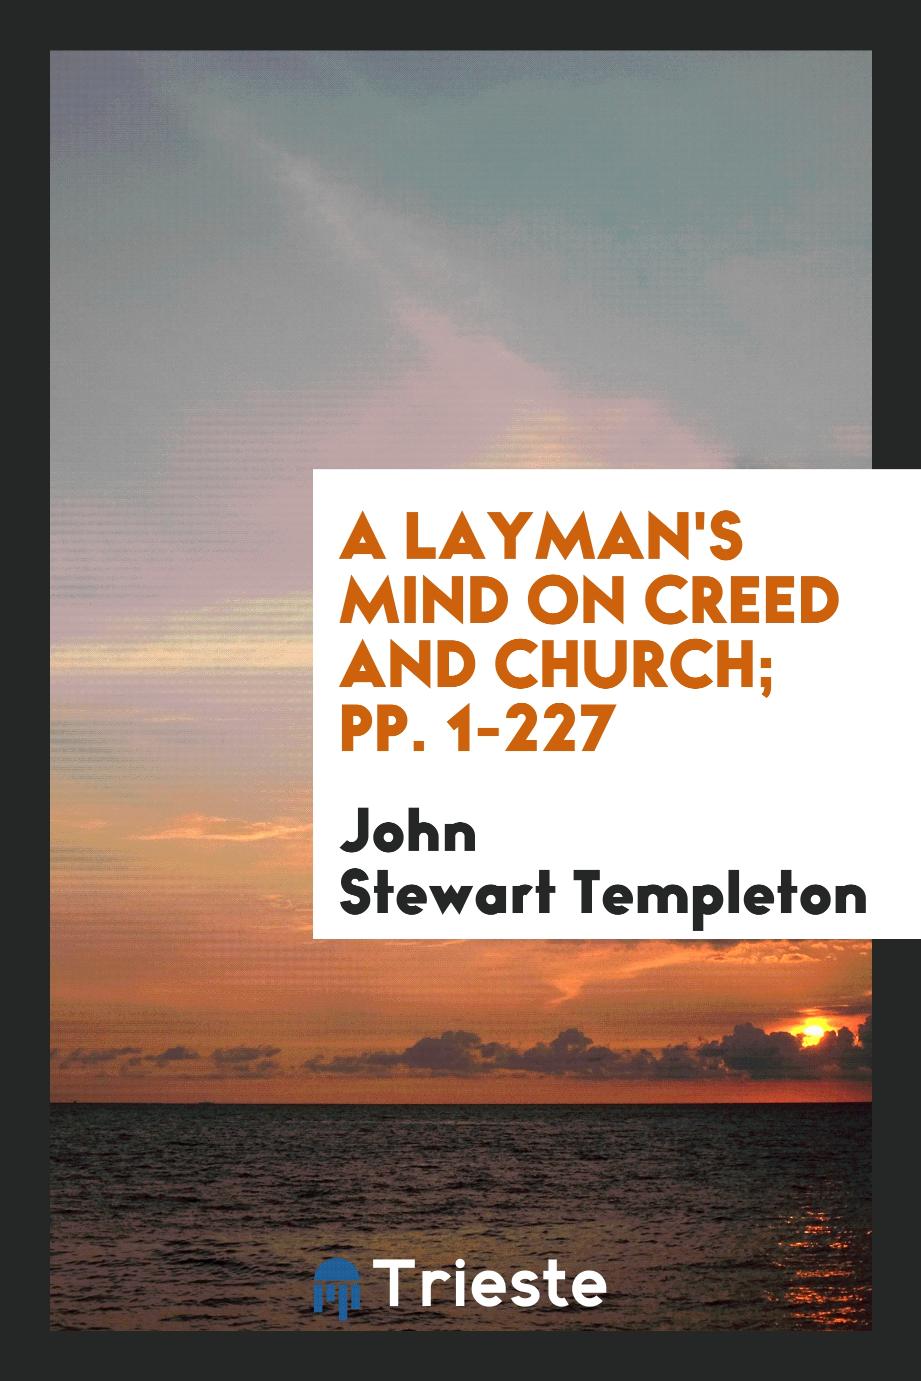 A Layman's Mind on Creed and Church; pp. 1-227